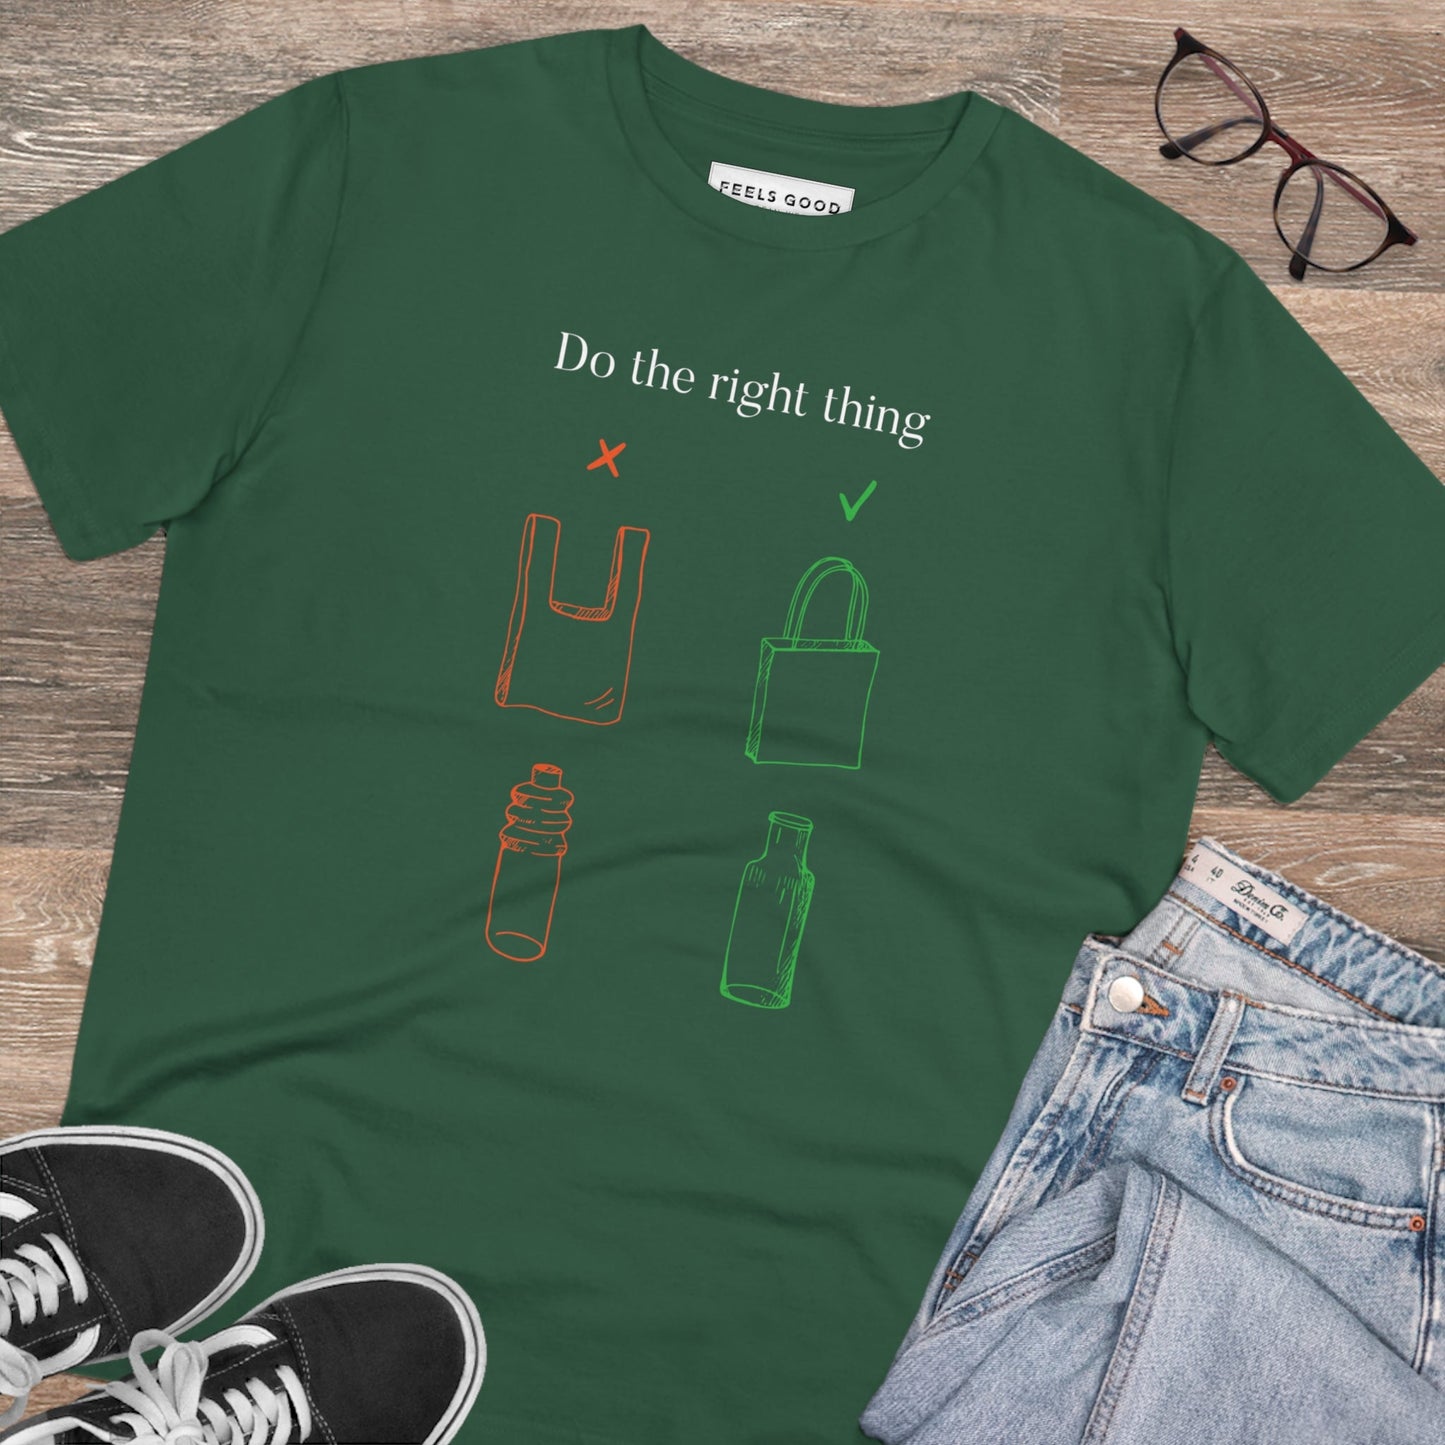 Climate Change 'No Plastic' Organic Cotton T-shirt - Do The Right Thing